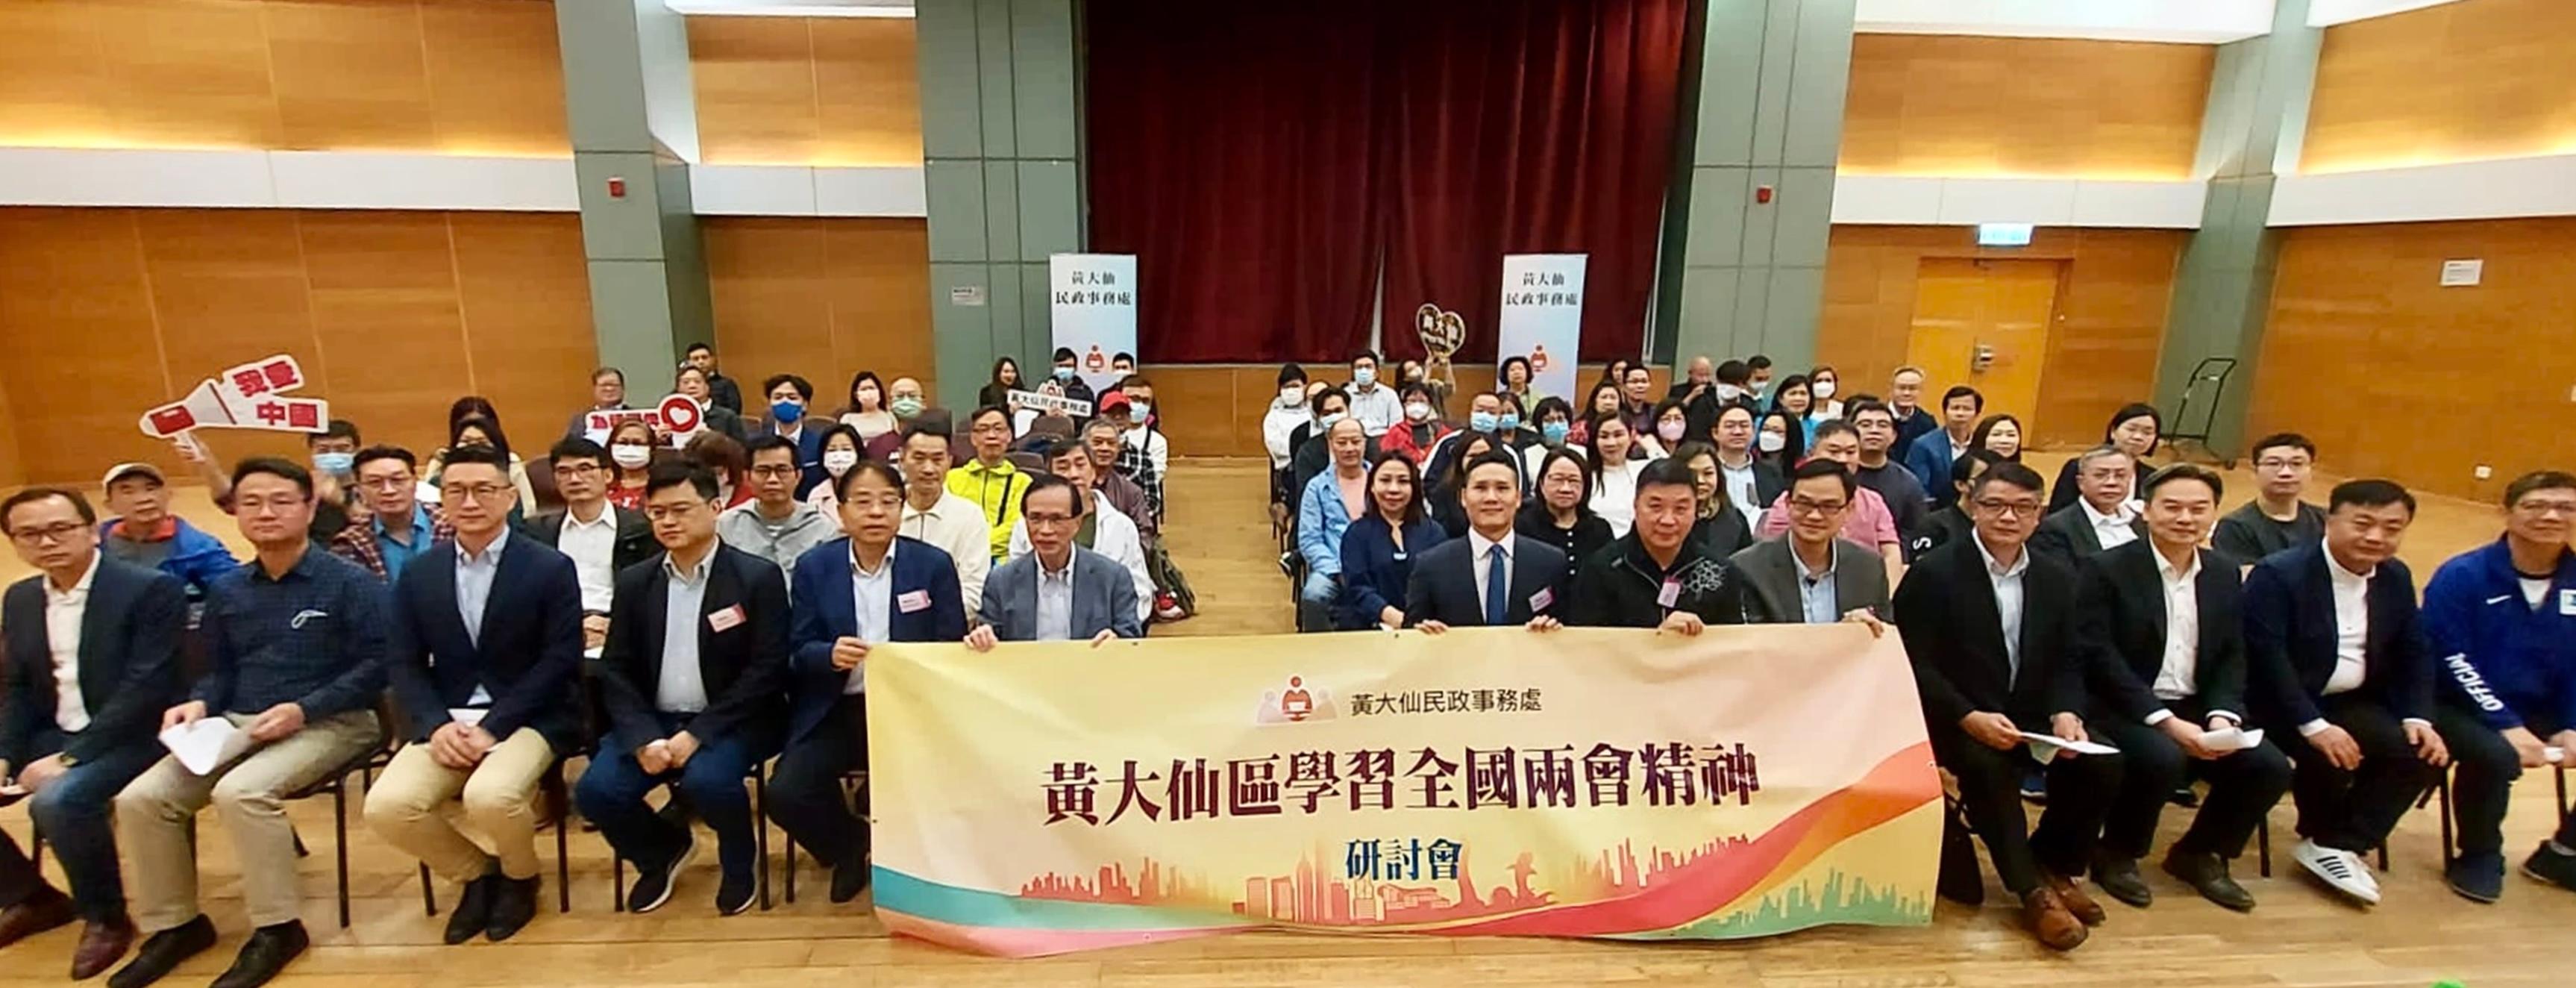 District Offices have held seminars on "Spirit of the 'two sessions'" to study the essentials of the "two sessions" this year and its important instructions to Hong Kong's future development. The Wong Tai Sin District Office held a seminar on 'Spirit of the "two sessions"' on March 14 at Tsz Wan Shan Community Hall. Photo shows the keynote speakers together with participants at the seminar. 